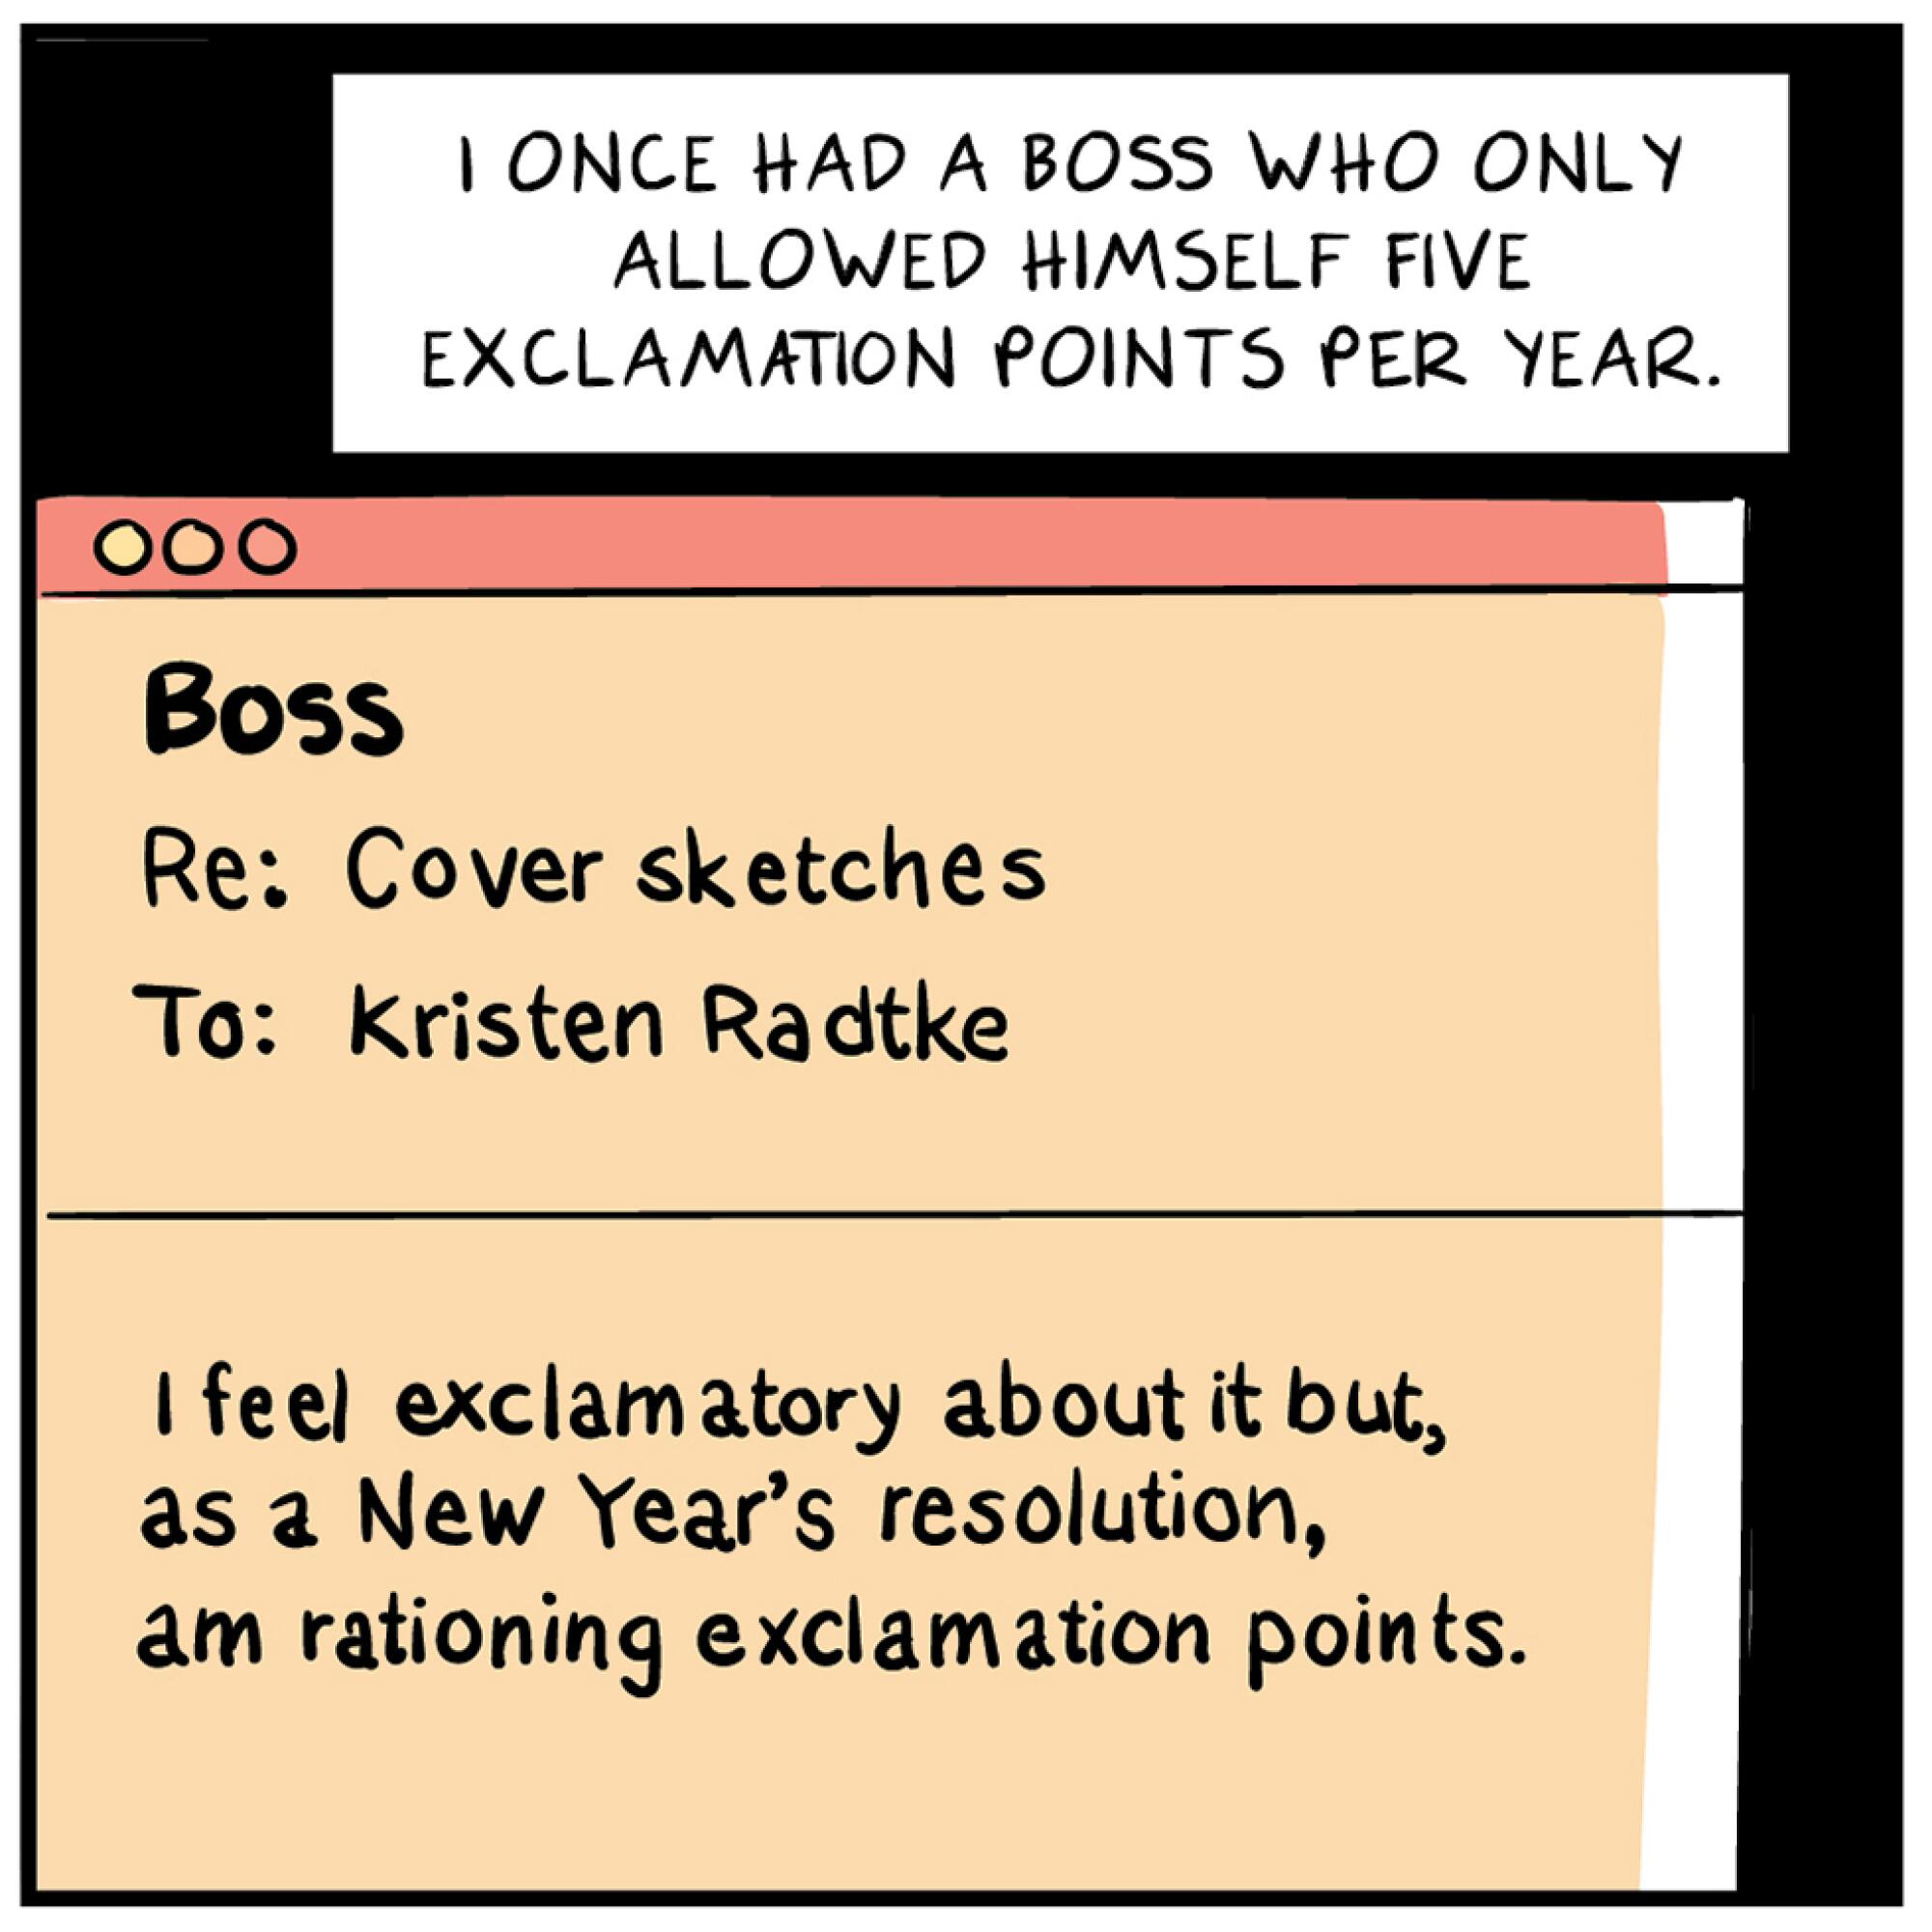 Comic panel with an illustration  of an email from a "boss" to an employee